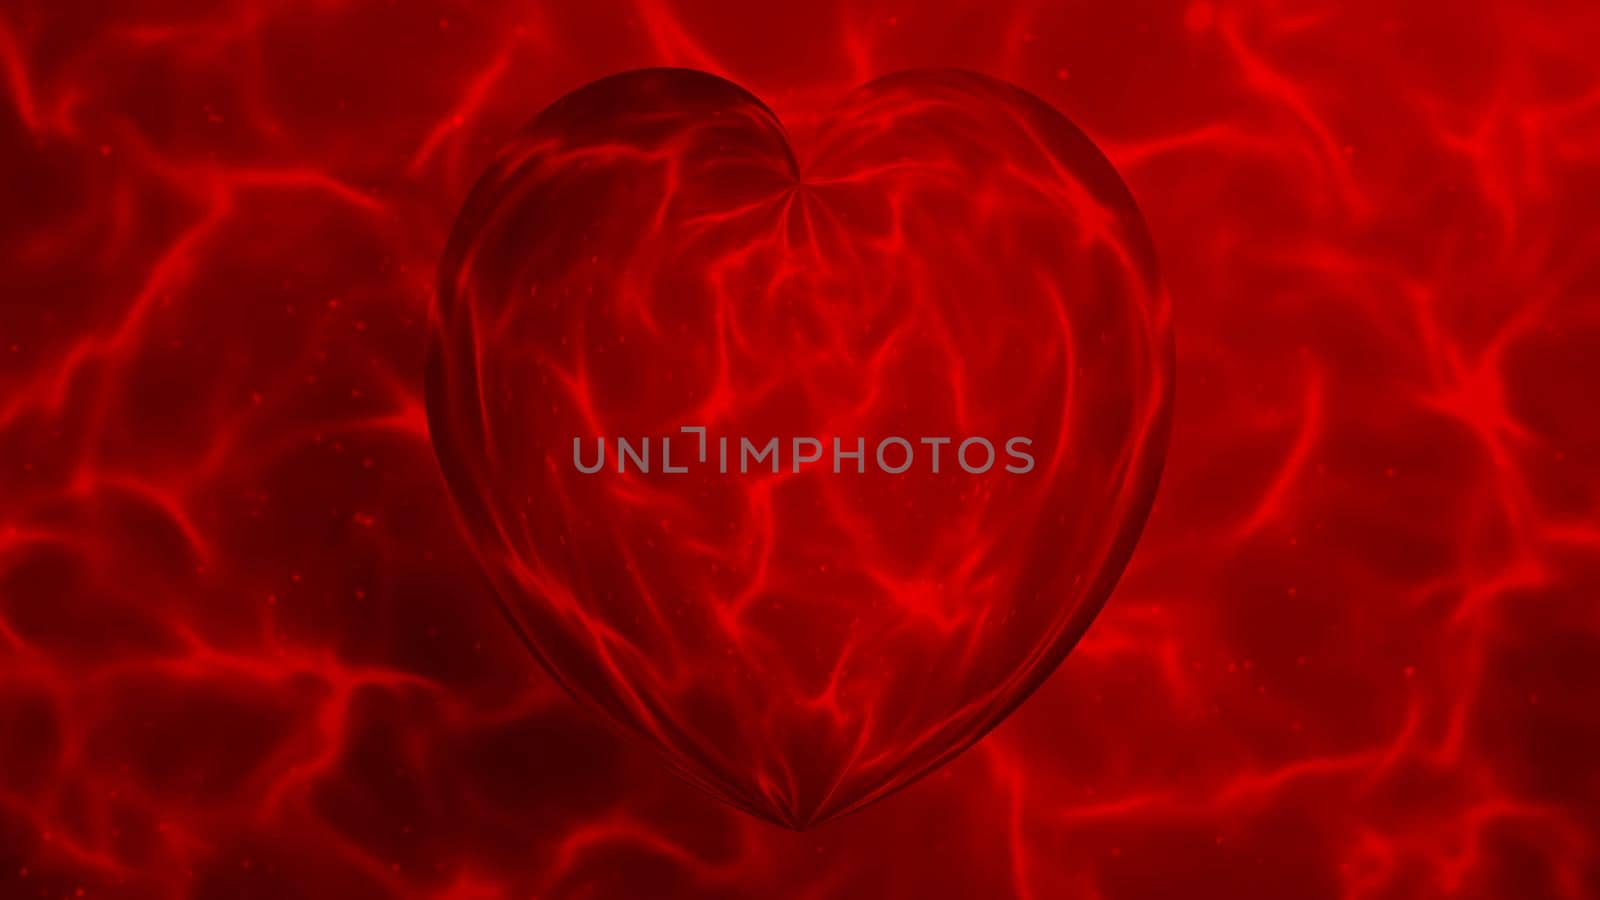 Abstract red background with a heart shape.